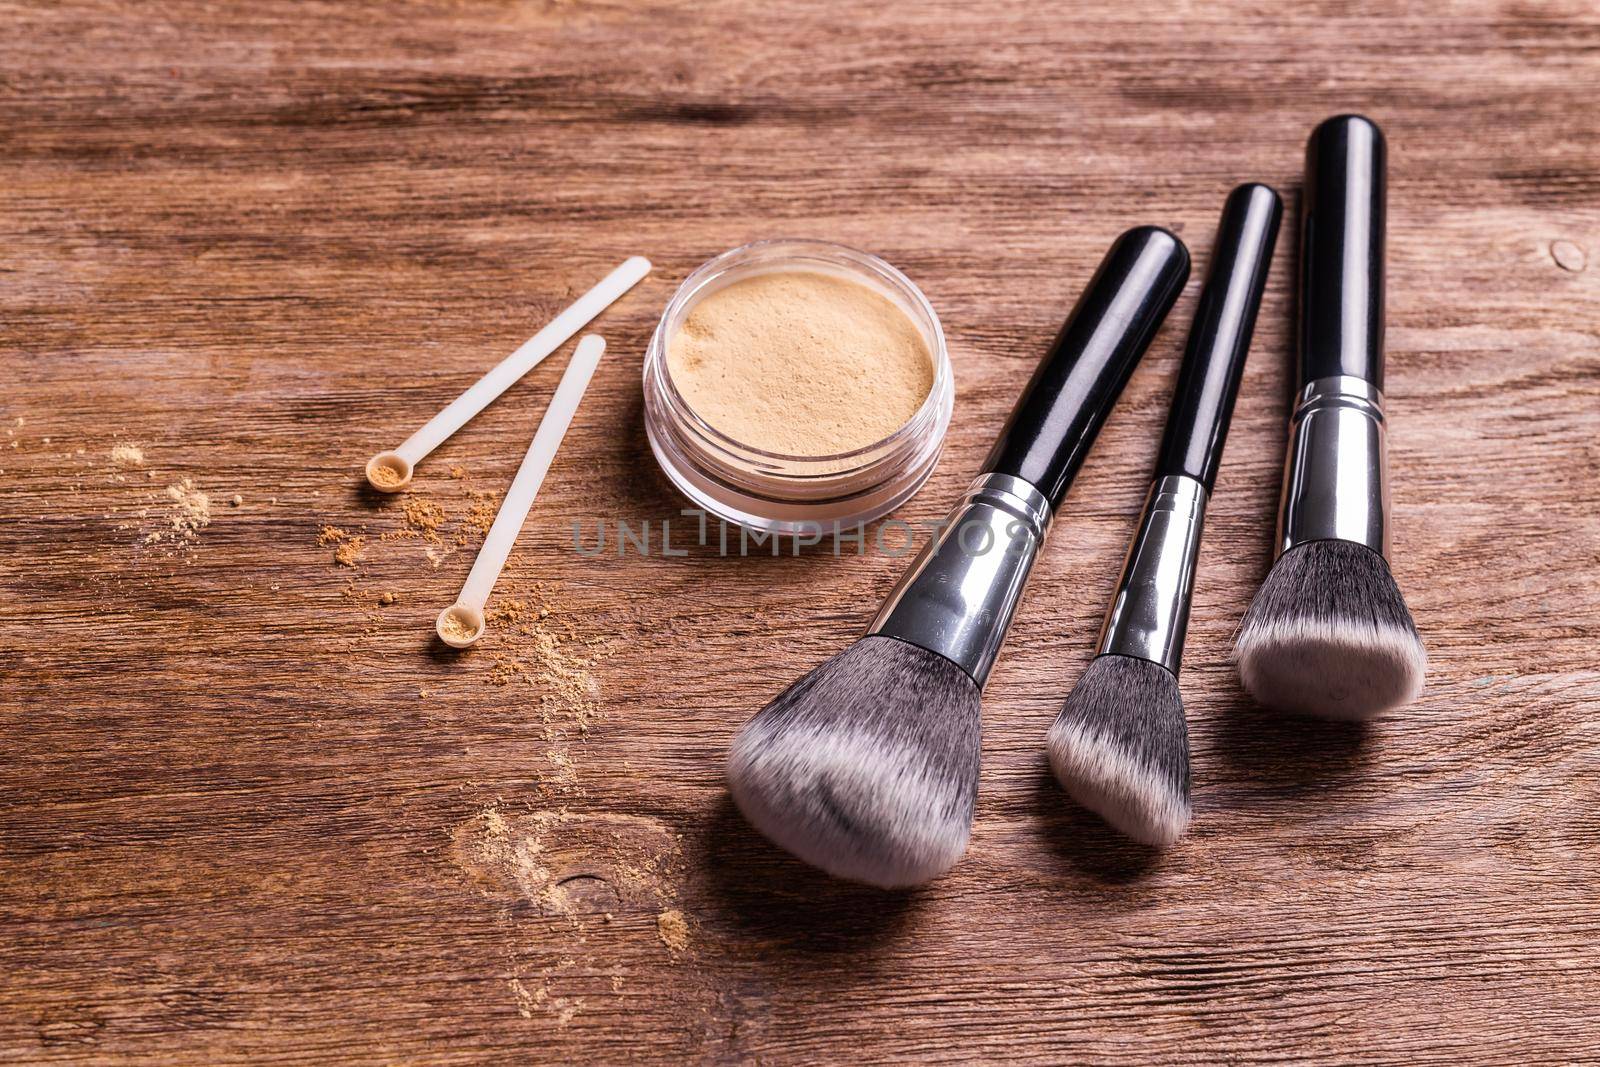 Mineral powder of nude colors with a spoon dispenser for make-up on wooden background by Satura86